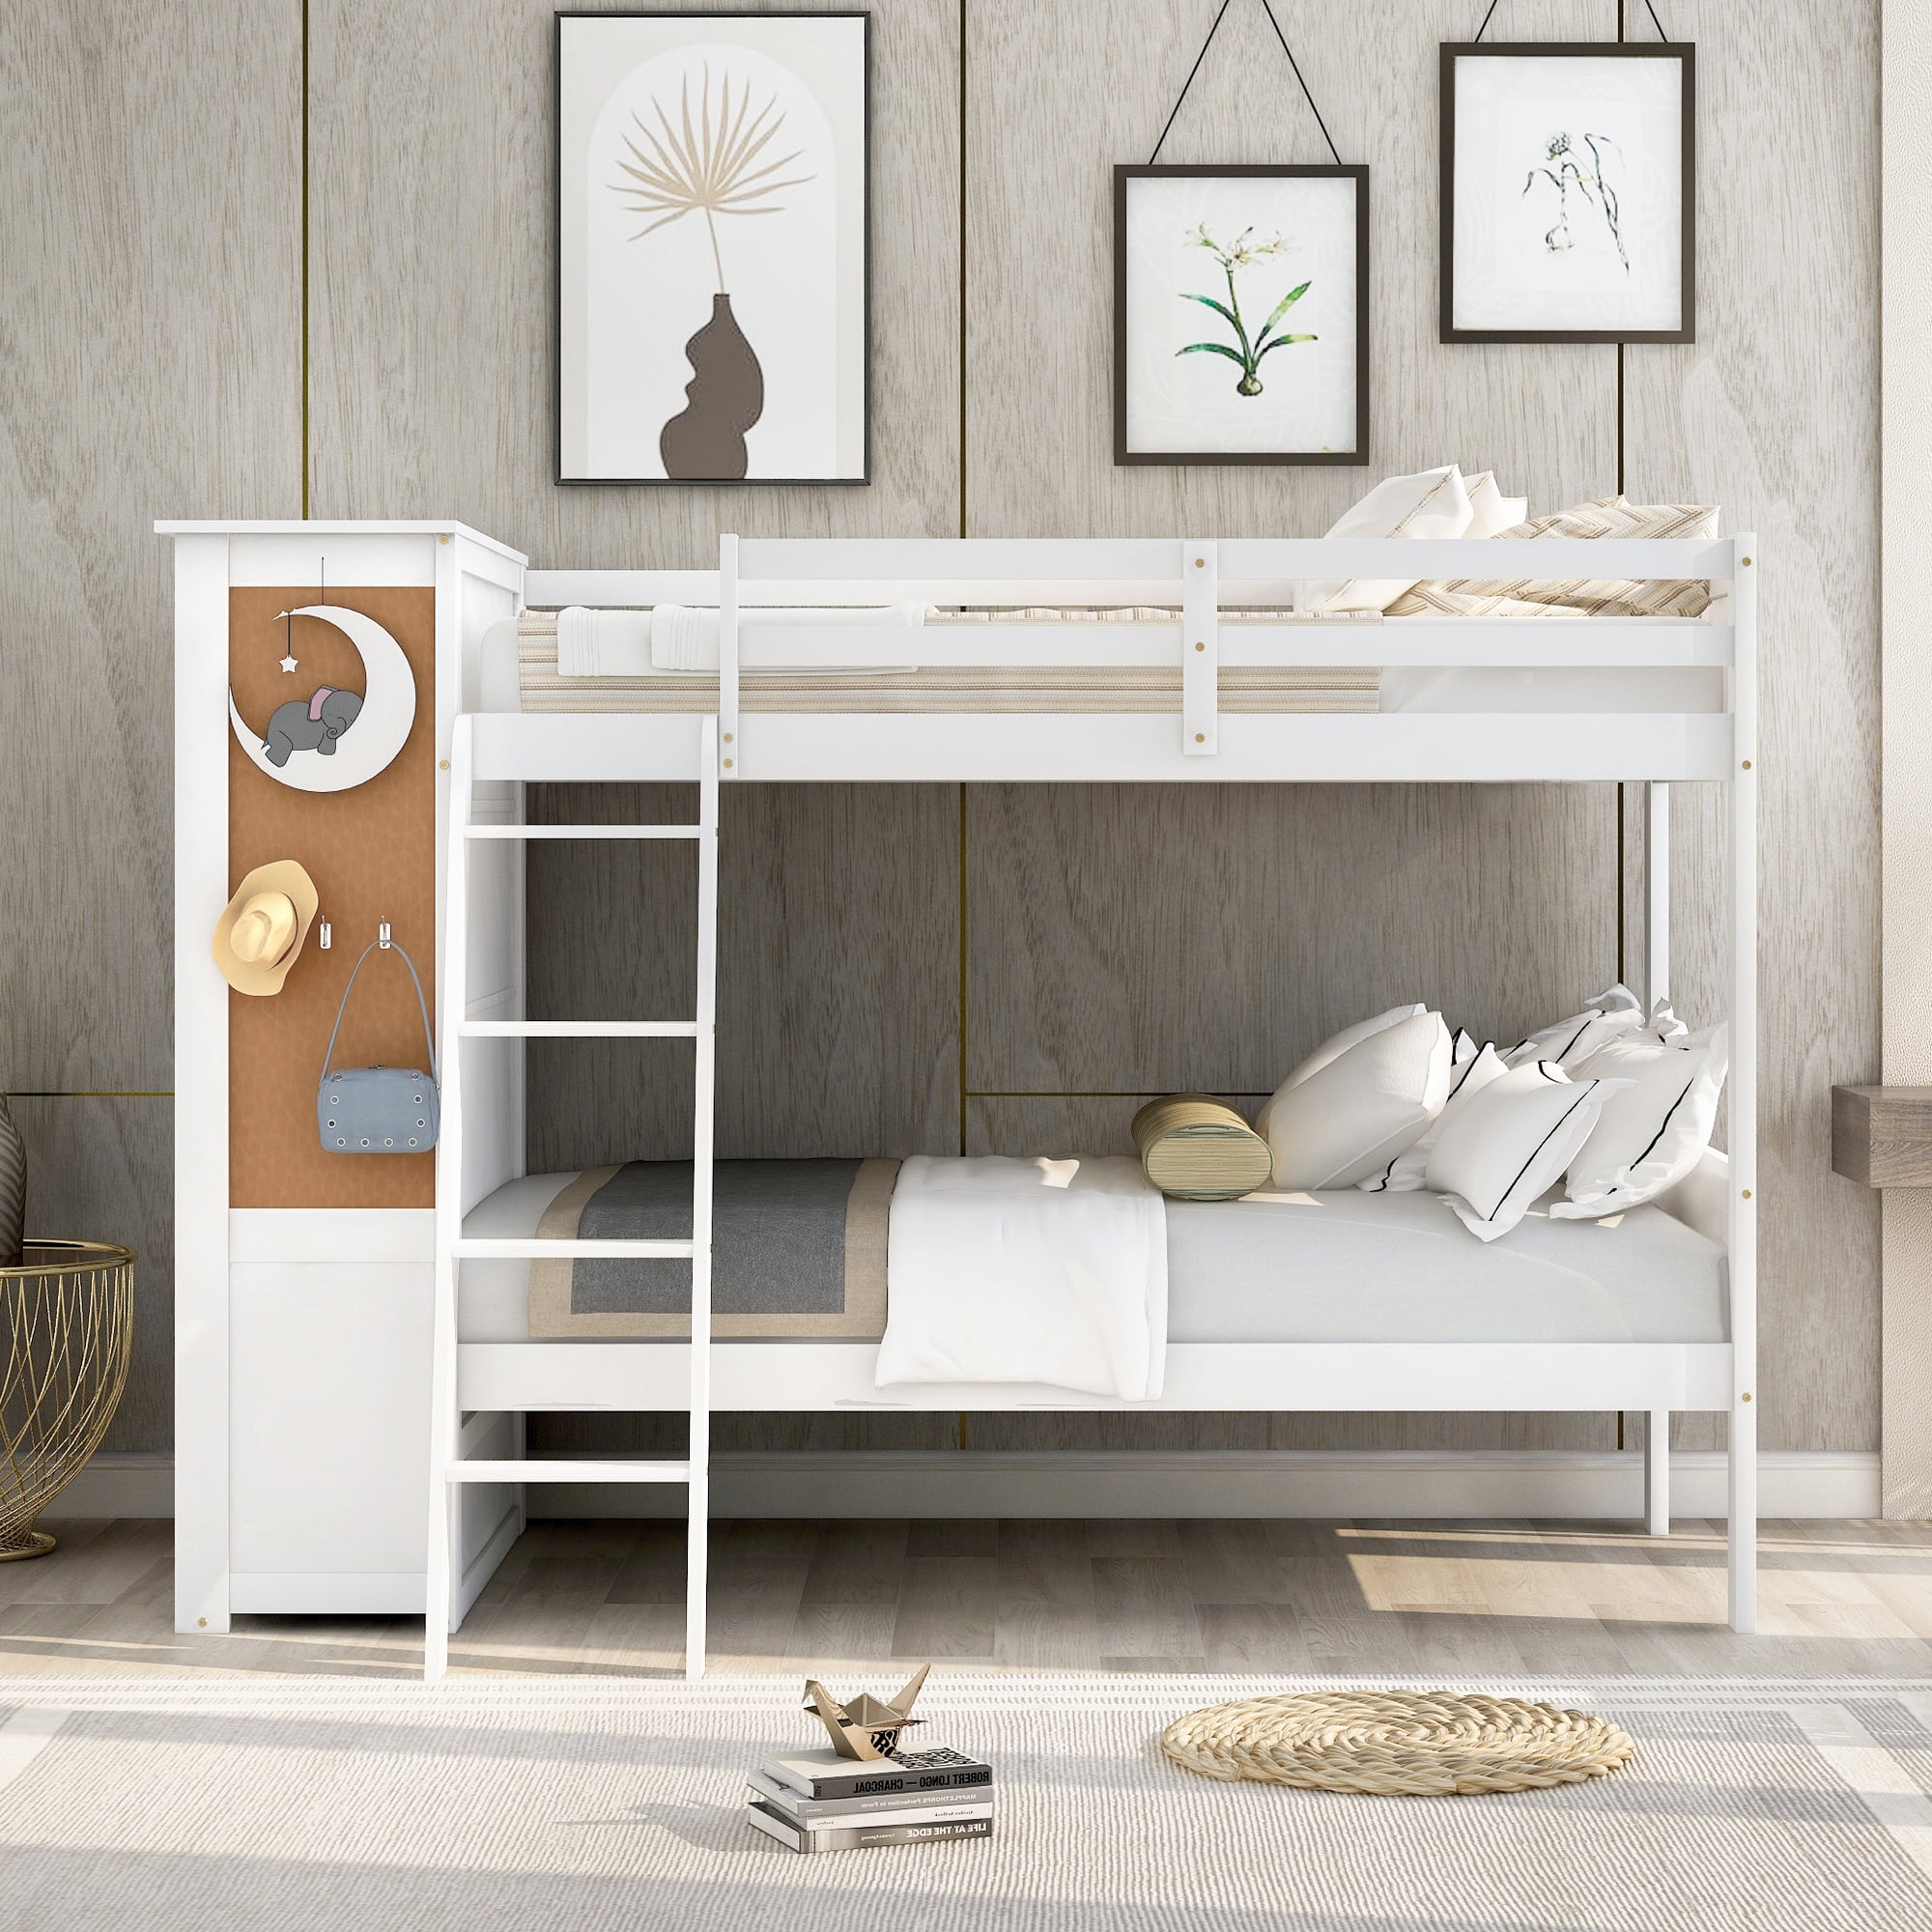 Lipobao Wood Twin Over Bunk Bed, White Twin Over Floor Bunk Bed With Storage